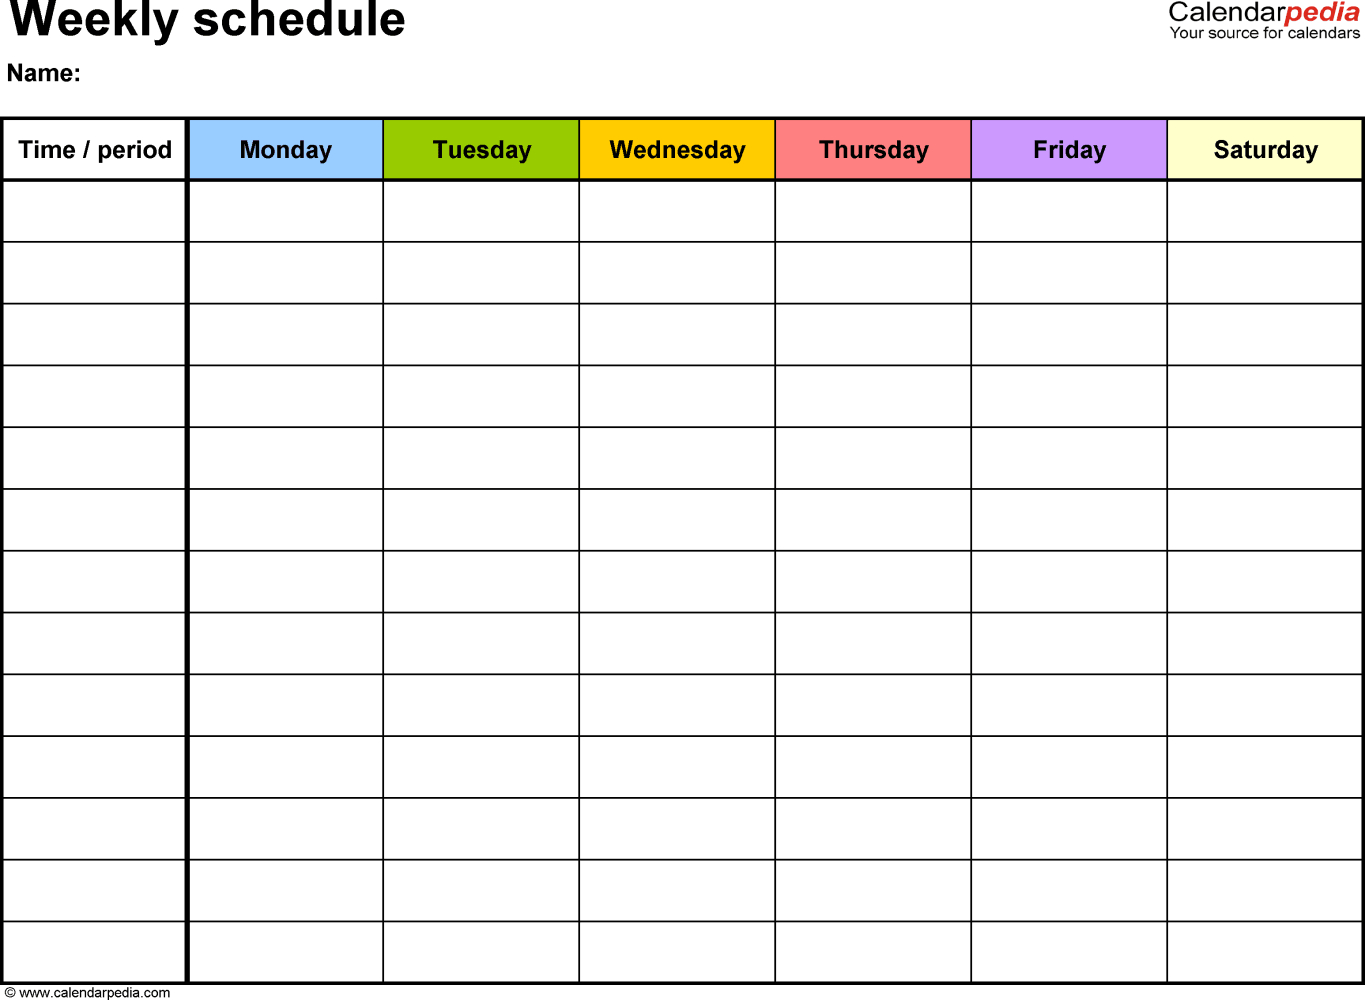 Pin By Carole Sharp On Organizing | Weekly Calendar Template intended for One Week Calendar With Time Slots